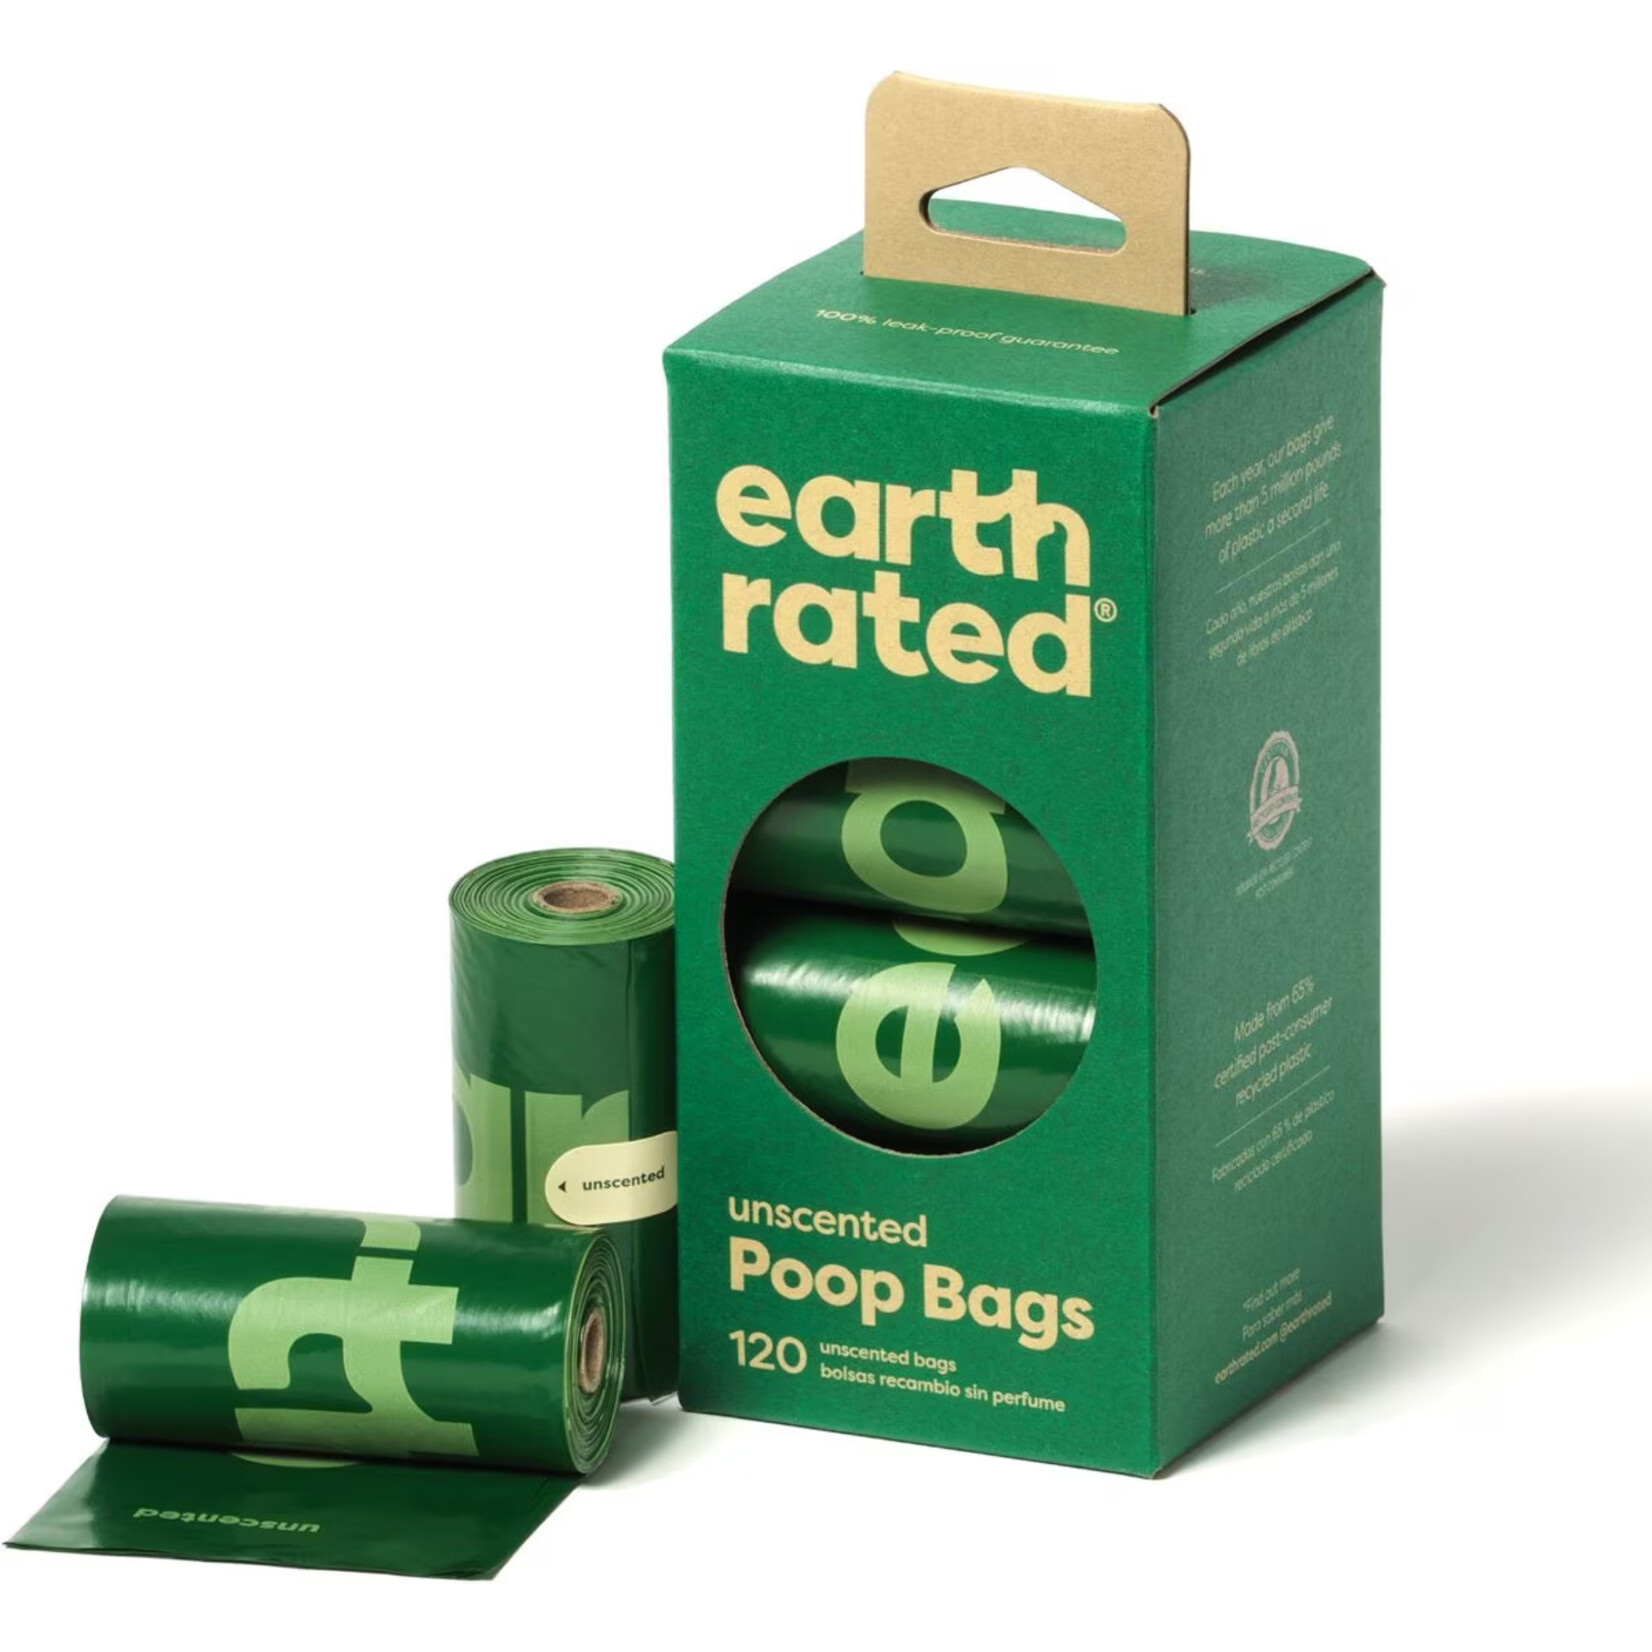 Earth Rated Earth Rated Unscented Poop Bags